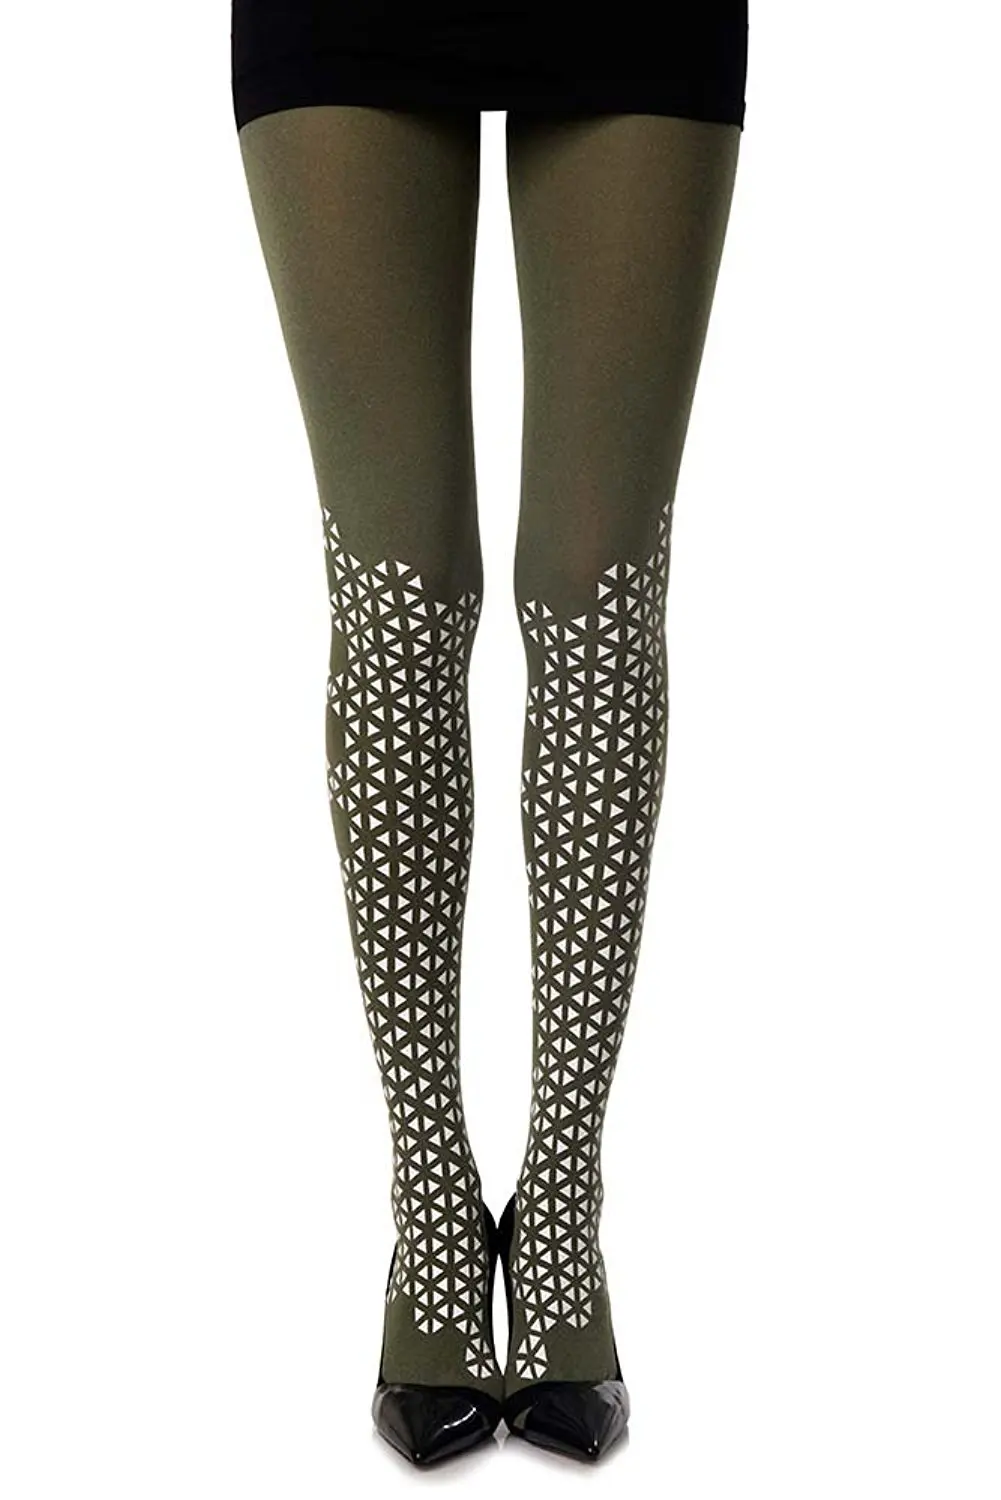 Cheap Green Patterned Tights, find Green Patterned Tights deals on line ...